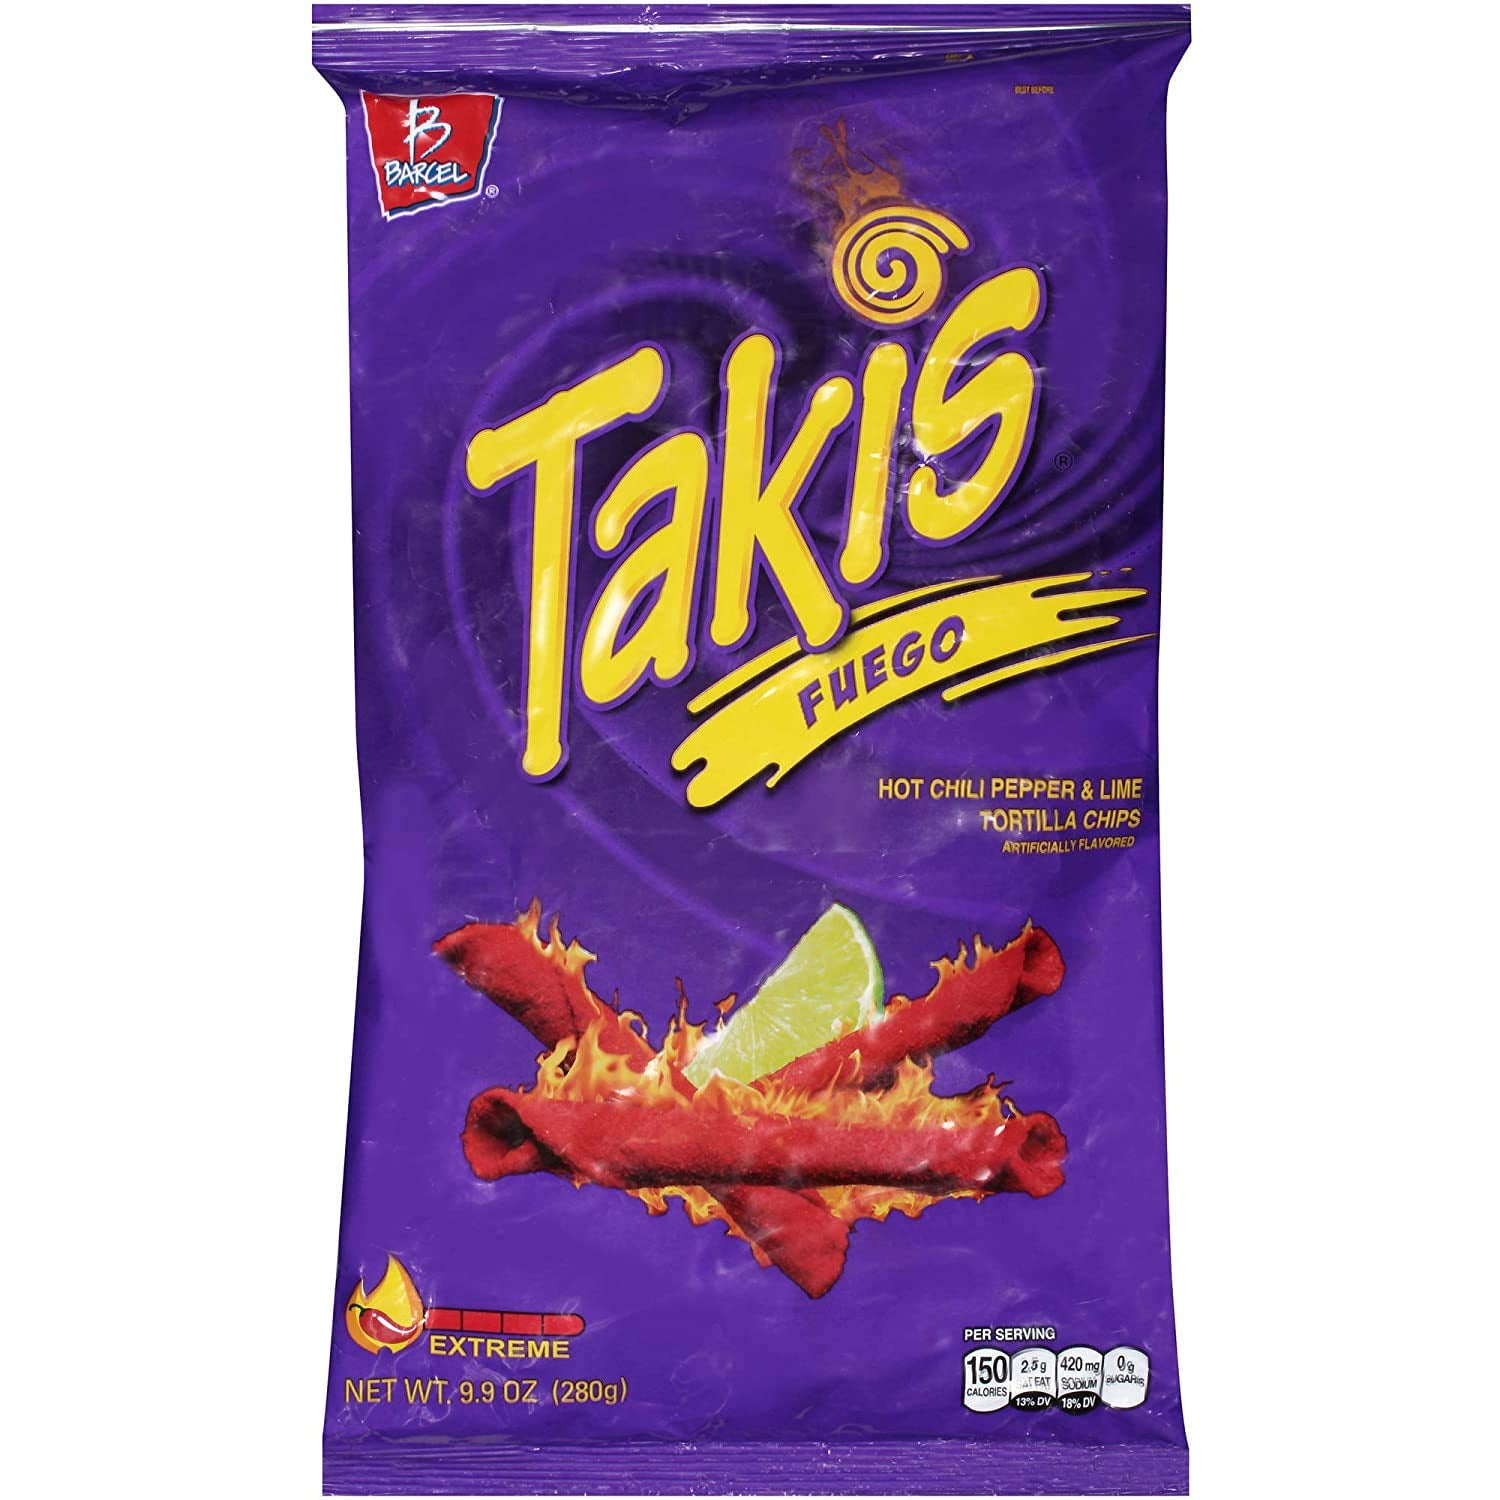 Takis® Fuego Hot Chili Pepper & Lime Tortilla Chips, 4 oz - Fry's